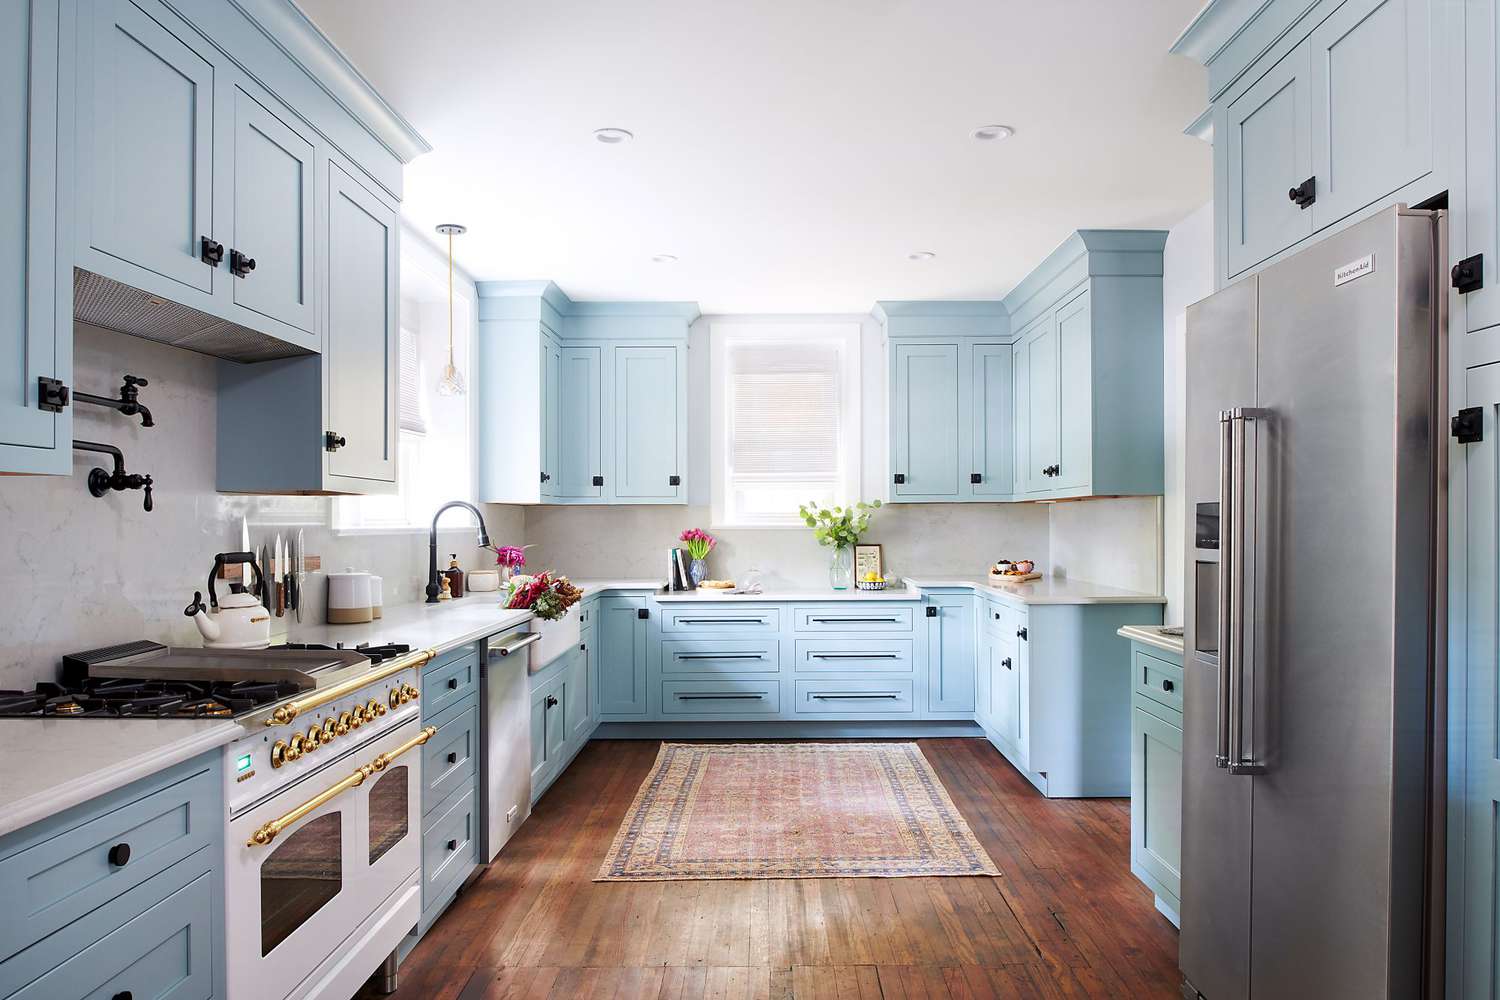 How To Pick Kitchen Paint Colors, How To Pick A Kitchen Color Scheme